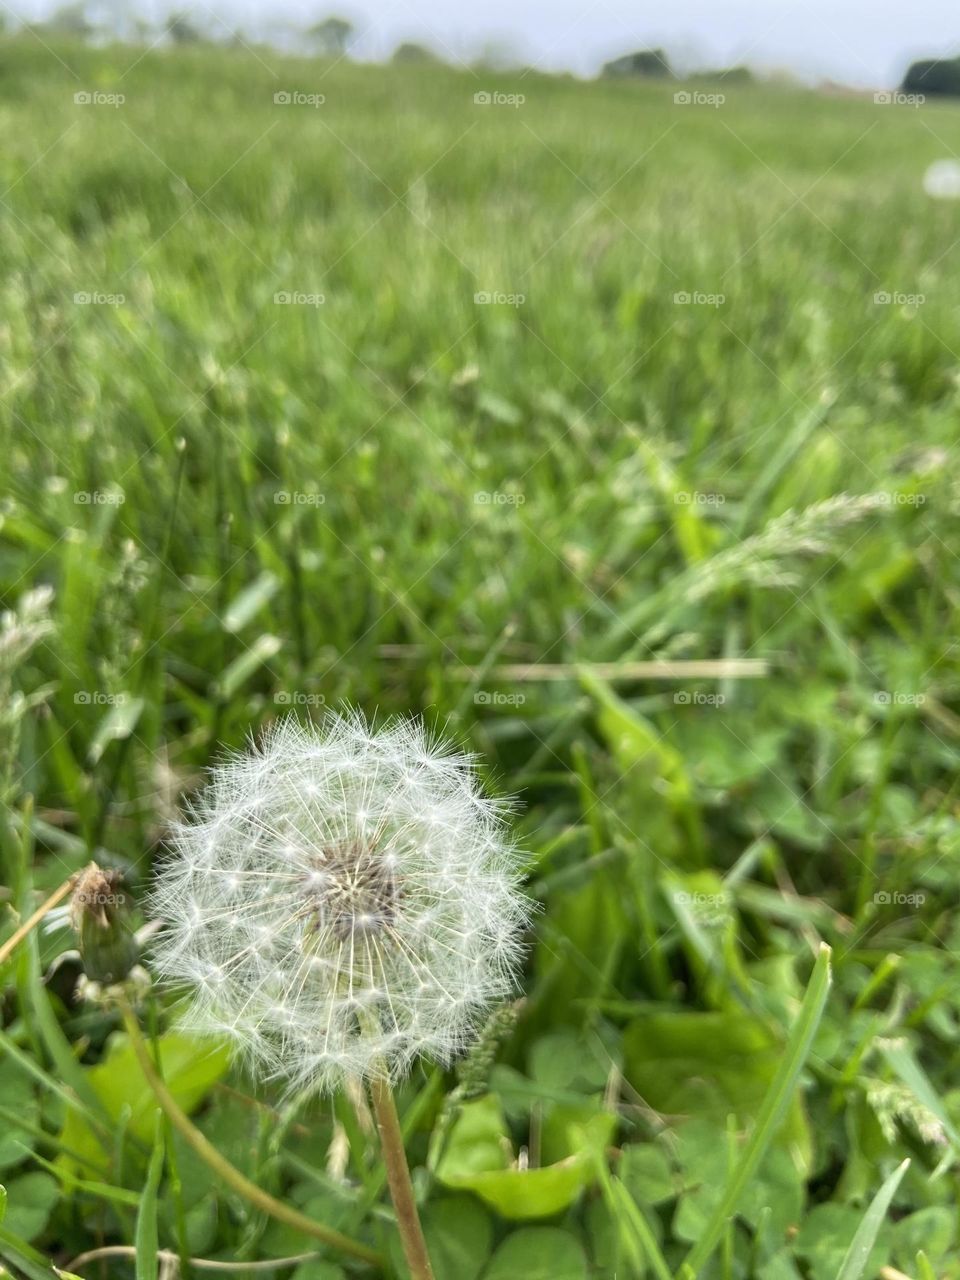 A lone dandelion in a field of green grass in a local park. Some think these are just weeds and a nuisance, but, to me, they are beautiful, wild flowers that remind me of childhood when we would pick them and blow the seeds. Now I let them be. 